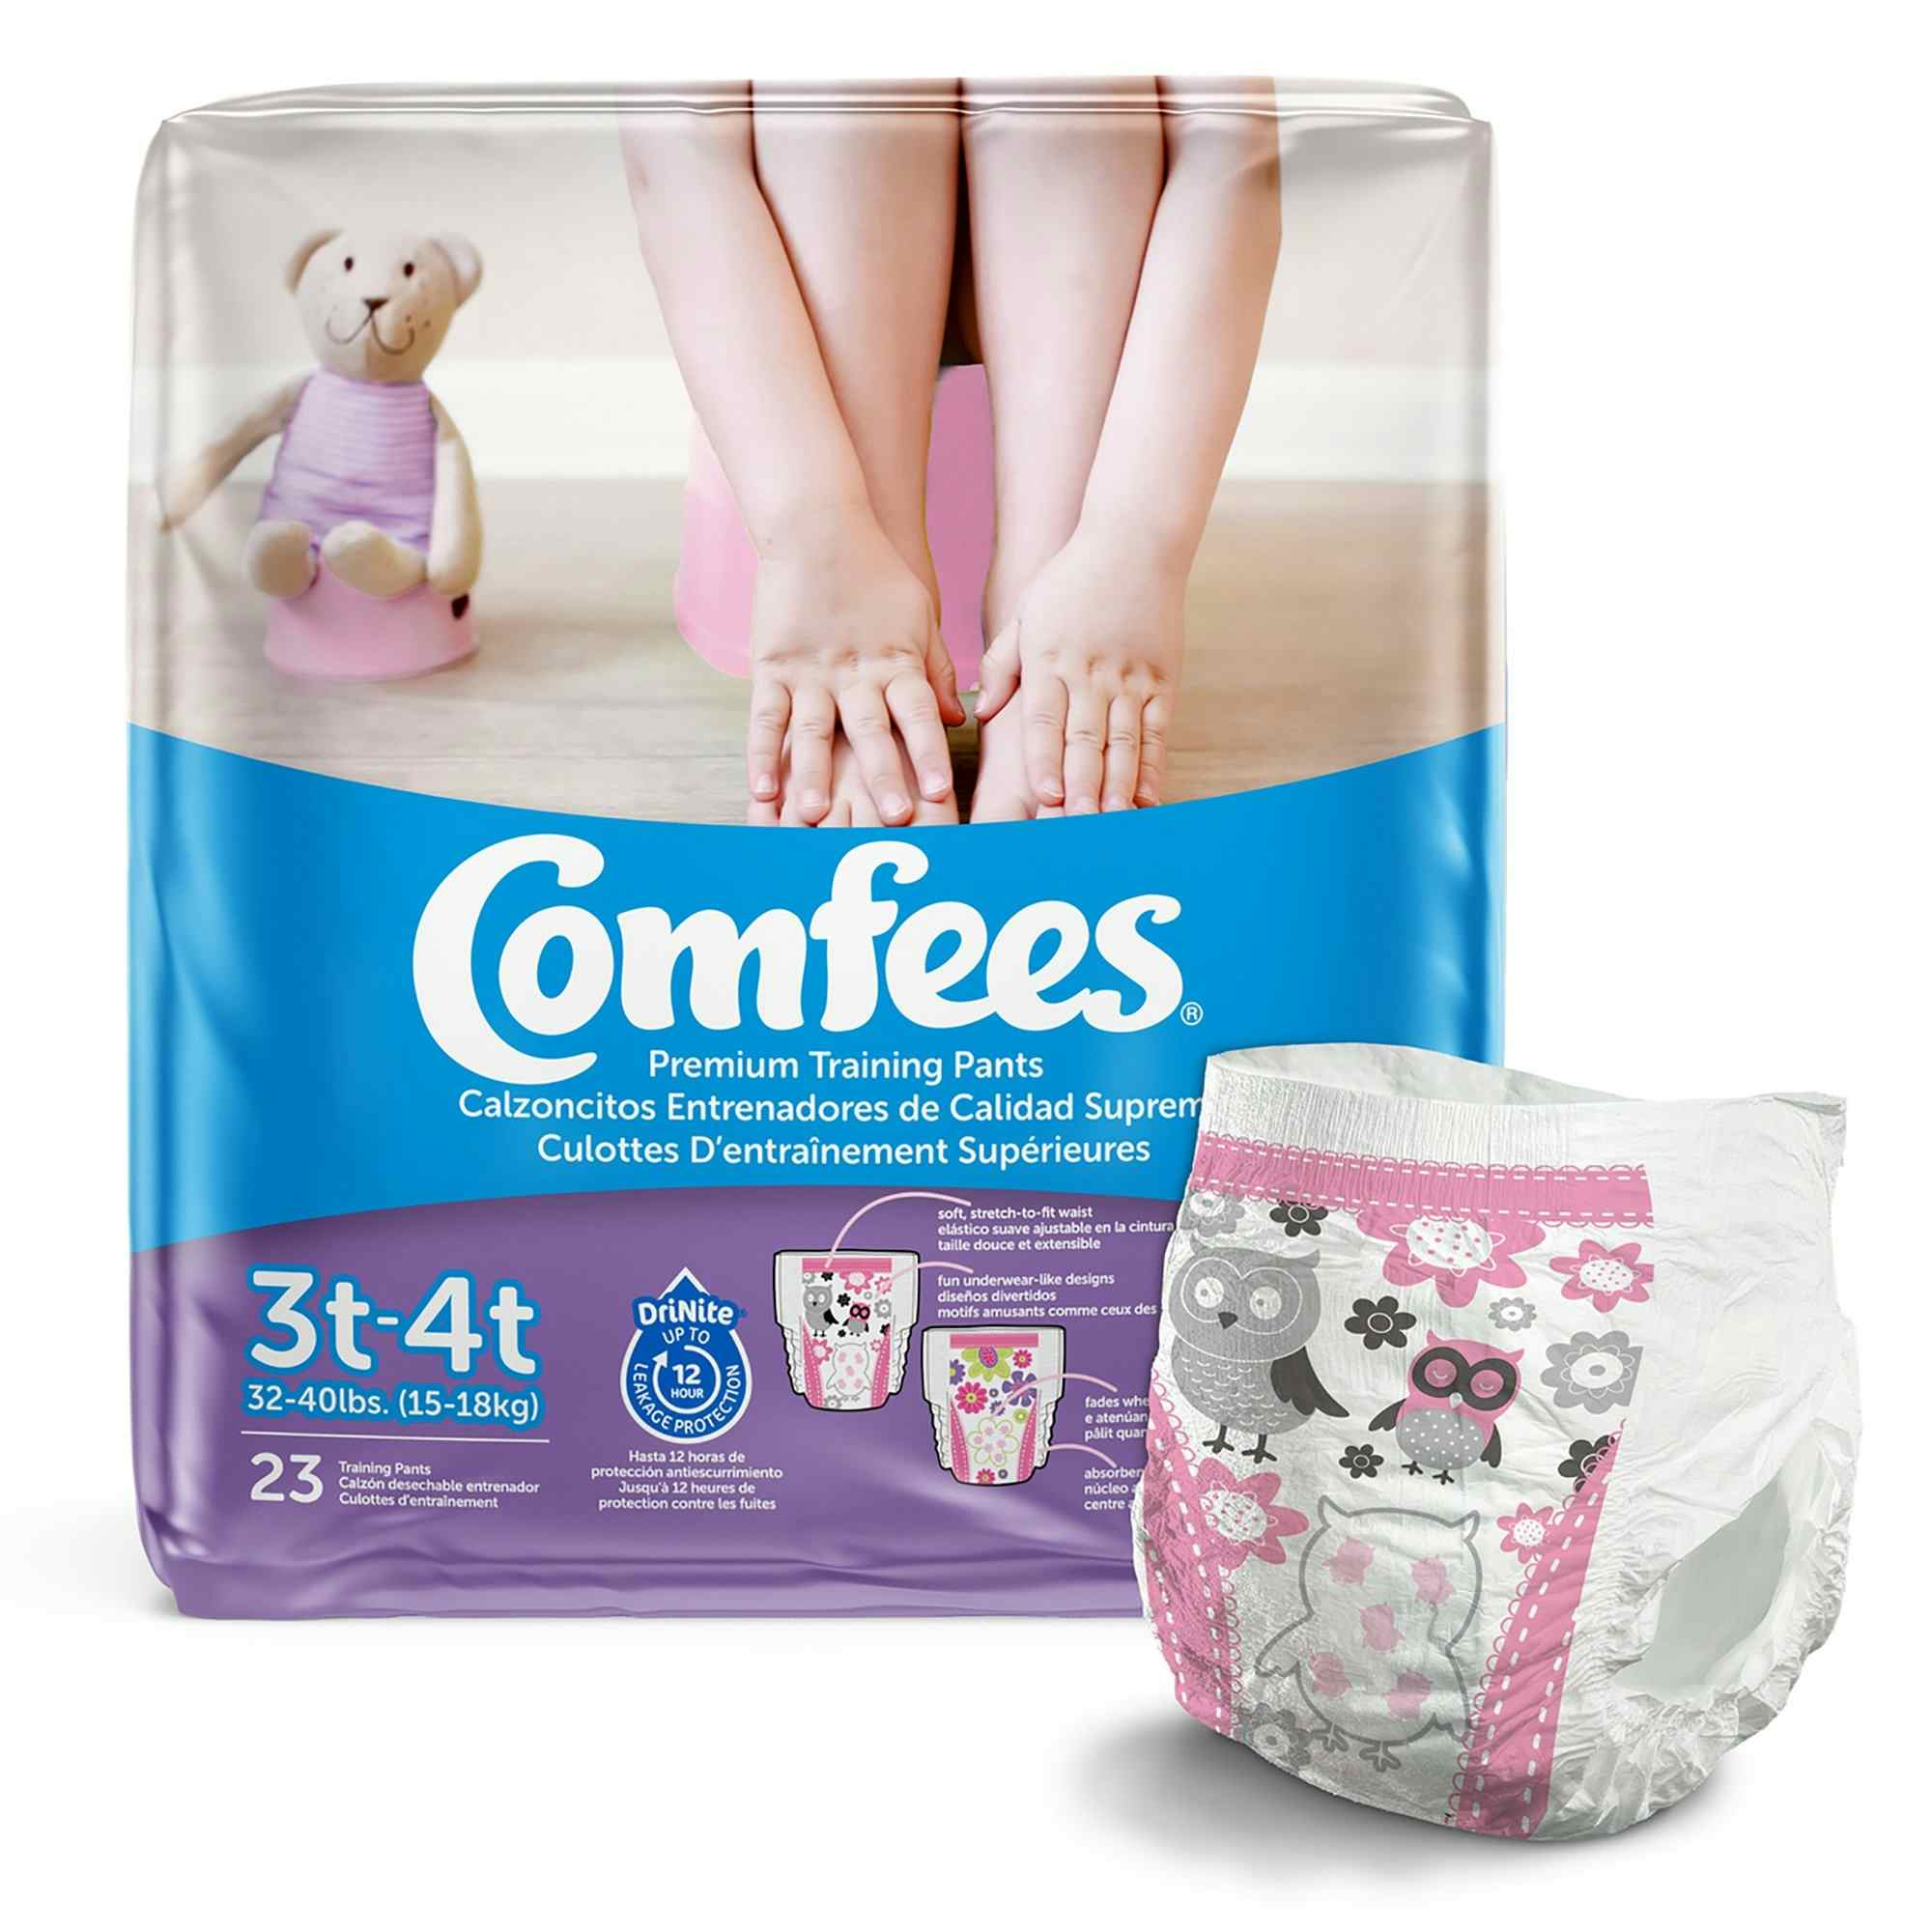 Comfees Toddler Premium Training Pants, Moderate Absorbency, CMF-G3, 3T to 4T (32 - 40 lbs.) - Girl - Case of 138 (6 Bags)